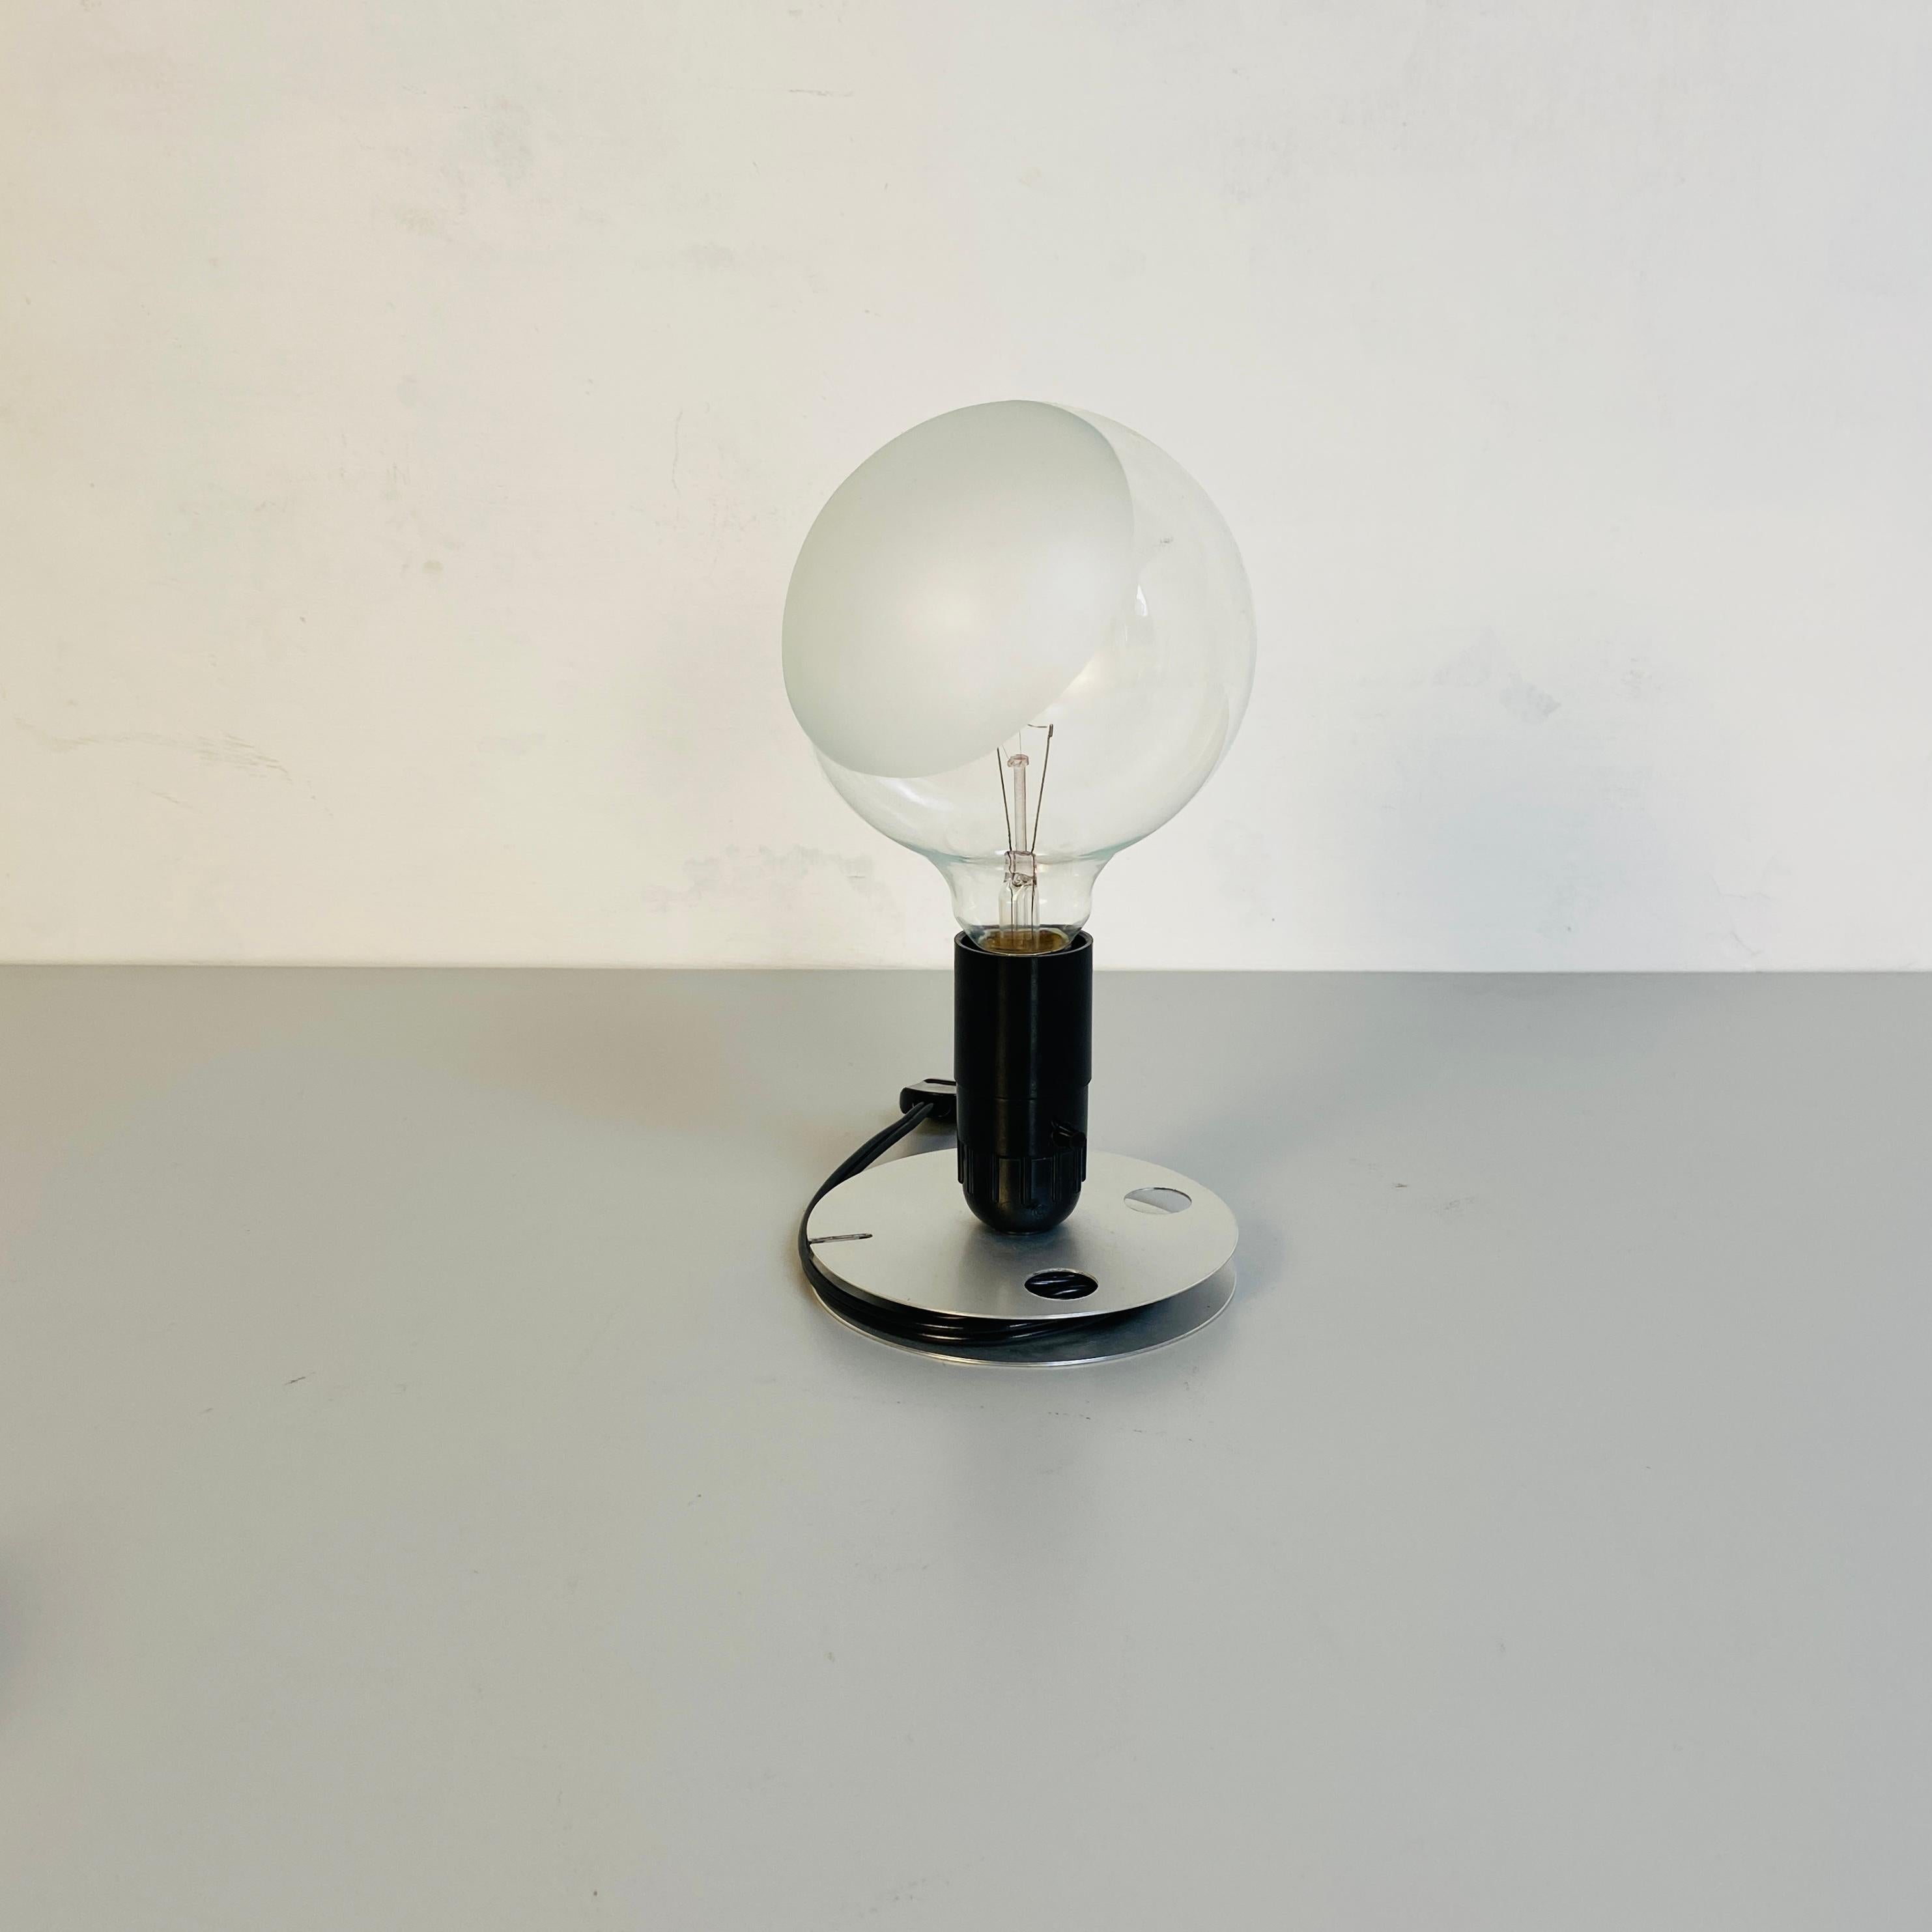 Italian Mid-Century Modern Lampadina table lamp by Achille Castiglioni for Flos, 1972
Lampadina table lamp with direct and diffused light with anodized aluminum base with rewinding function for the electric cable. Black painted bakelite bulb